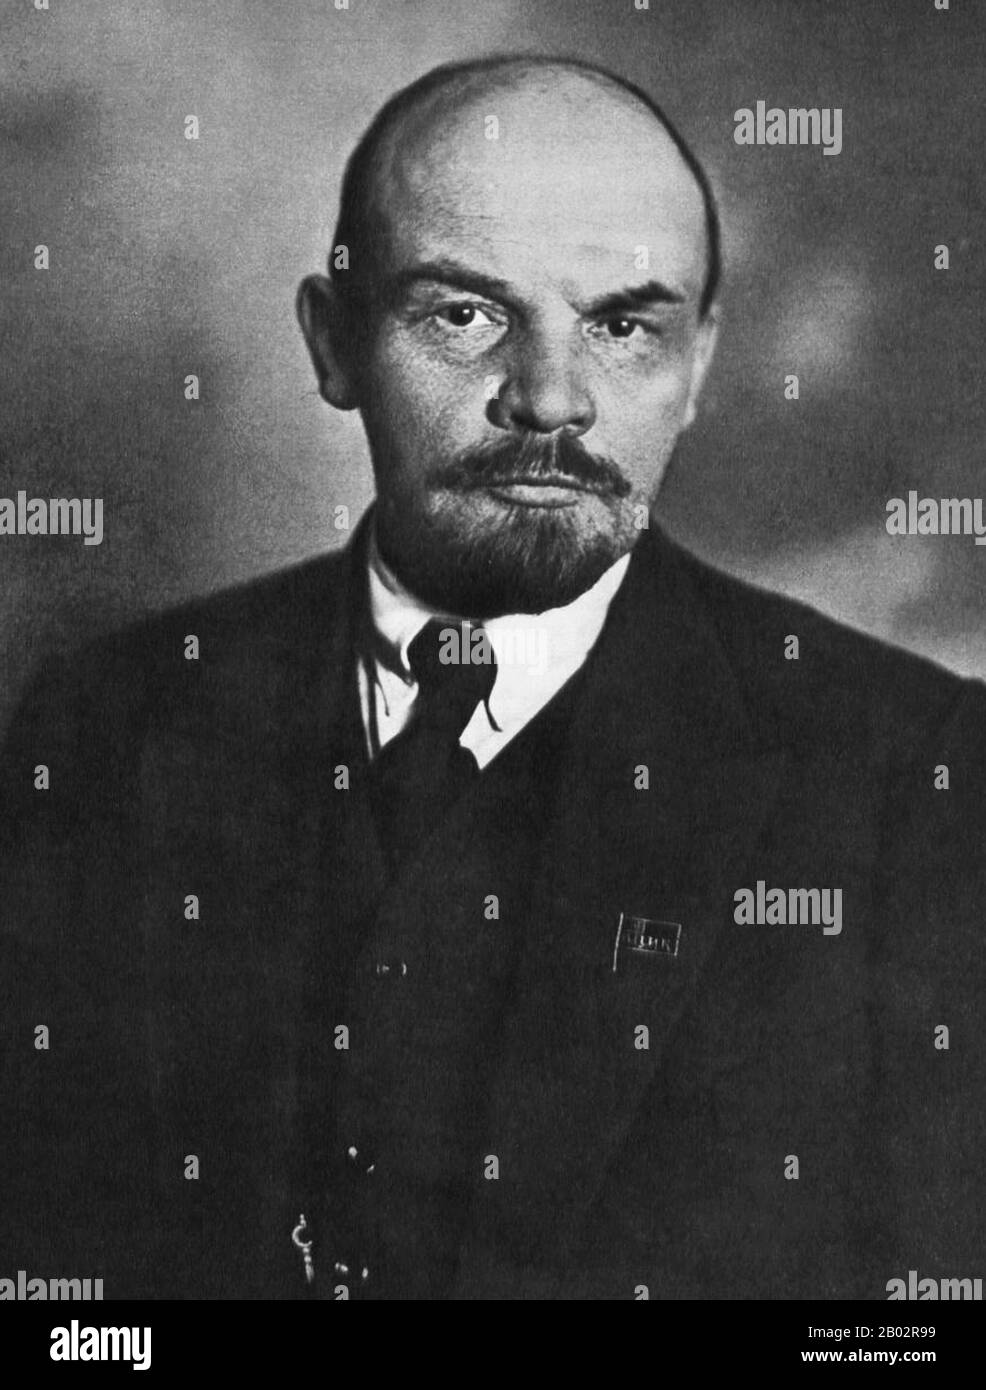 Vladimir Ilyich Lenin, born Vladimir Ilyich Ulyanov (22 April 1870 – 21 January 1924) was a Russian communist revolutionary, politician and political theorist.  Lenin served as the leader of the Russian Soviet Federative Socialist Republic from 1917, and then concurrently as Premier of the Soviet Union from 1922, until his death. Under his administration, the Russian Empire disintegrated and was replaced by the Soviet Union, a single-party constitutionally socialist state; all wealth including land, industry and business were nationalised.  Based in Marxism, his theoretical contributions to Ma Stock Photo